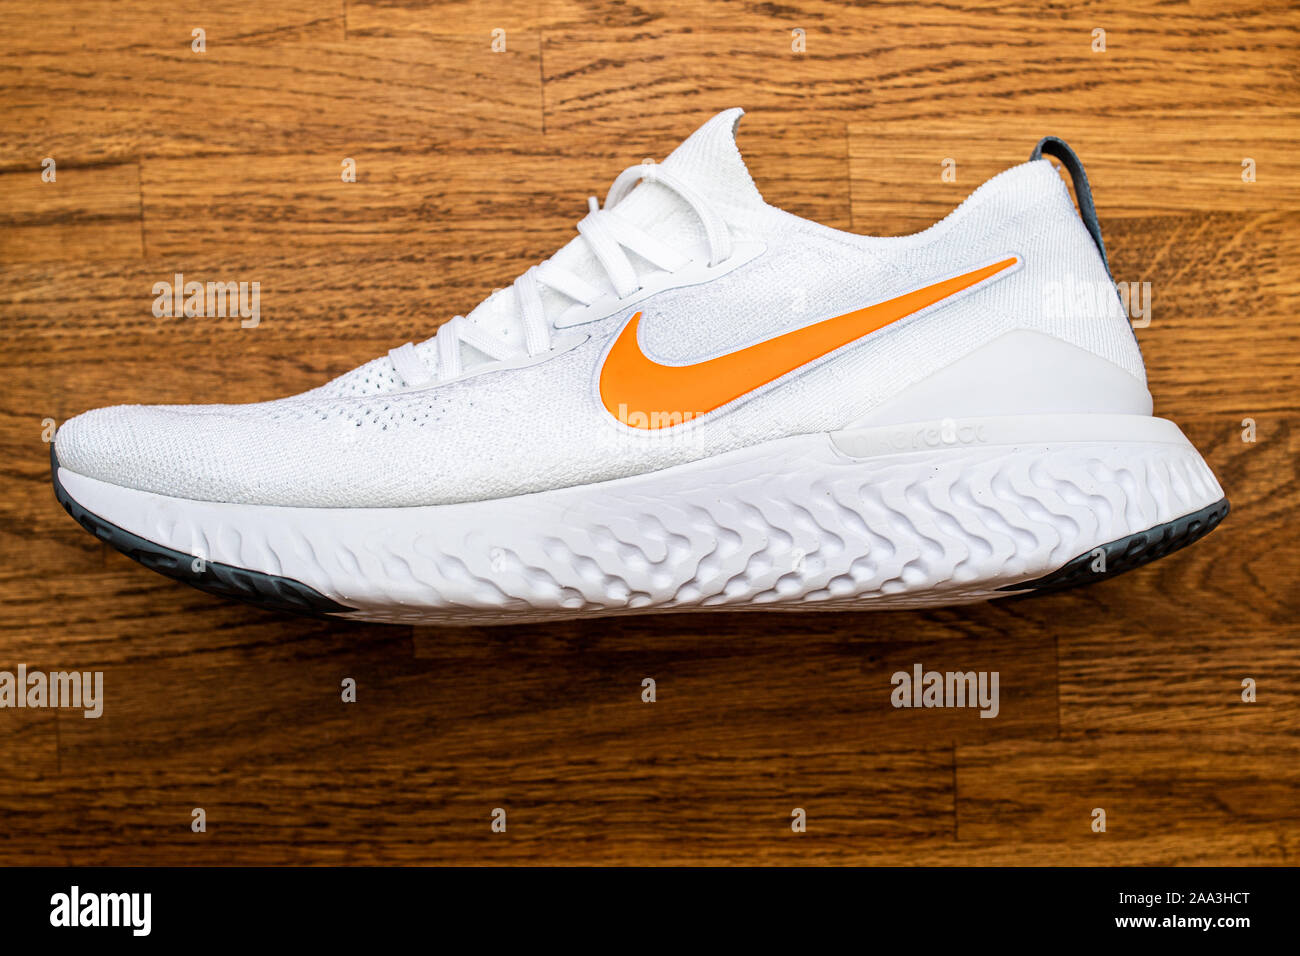 Flyknit High Resolution Stock Photography and Images - Alamy